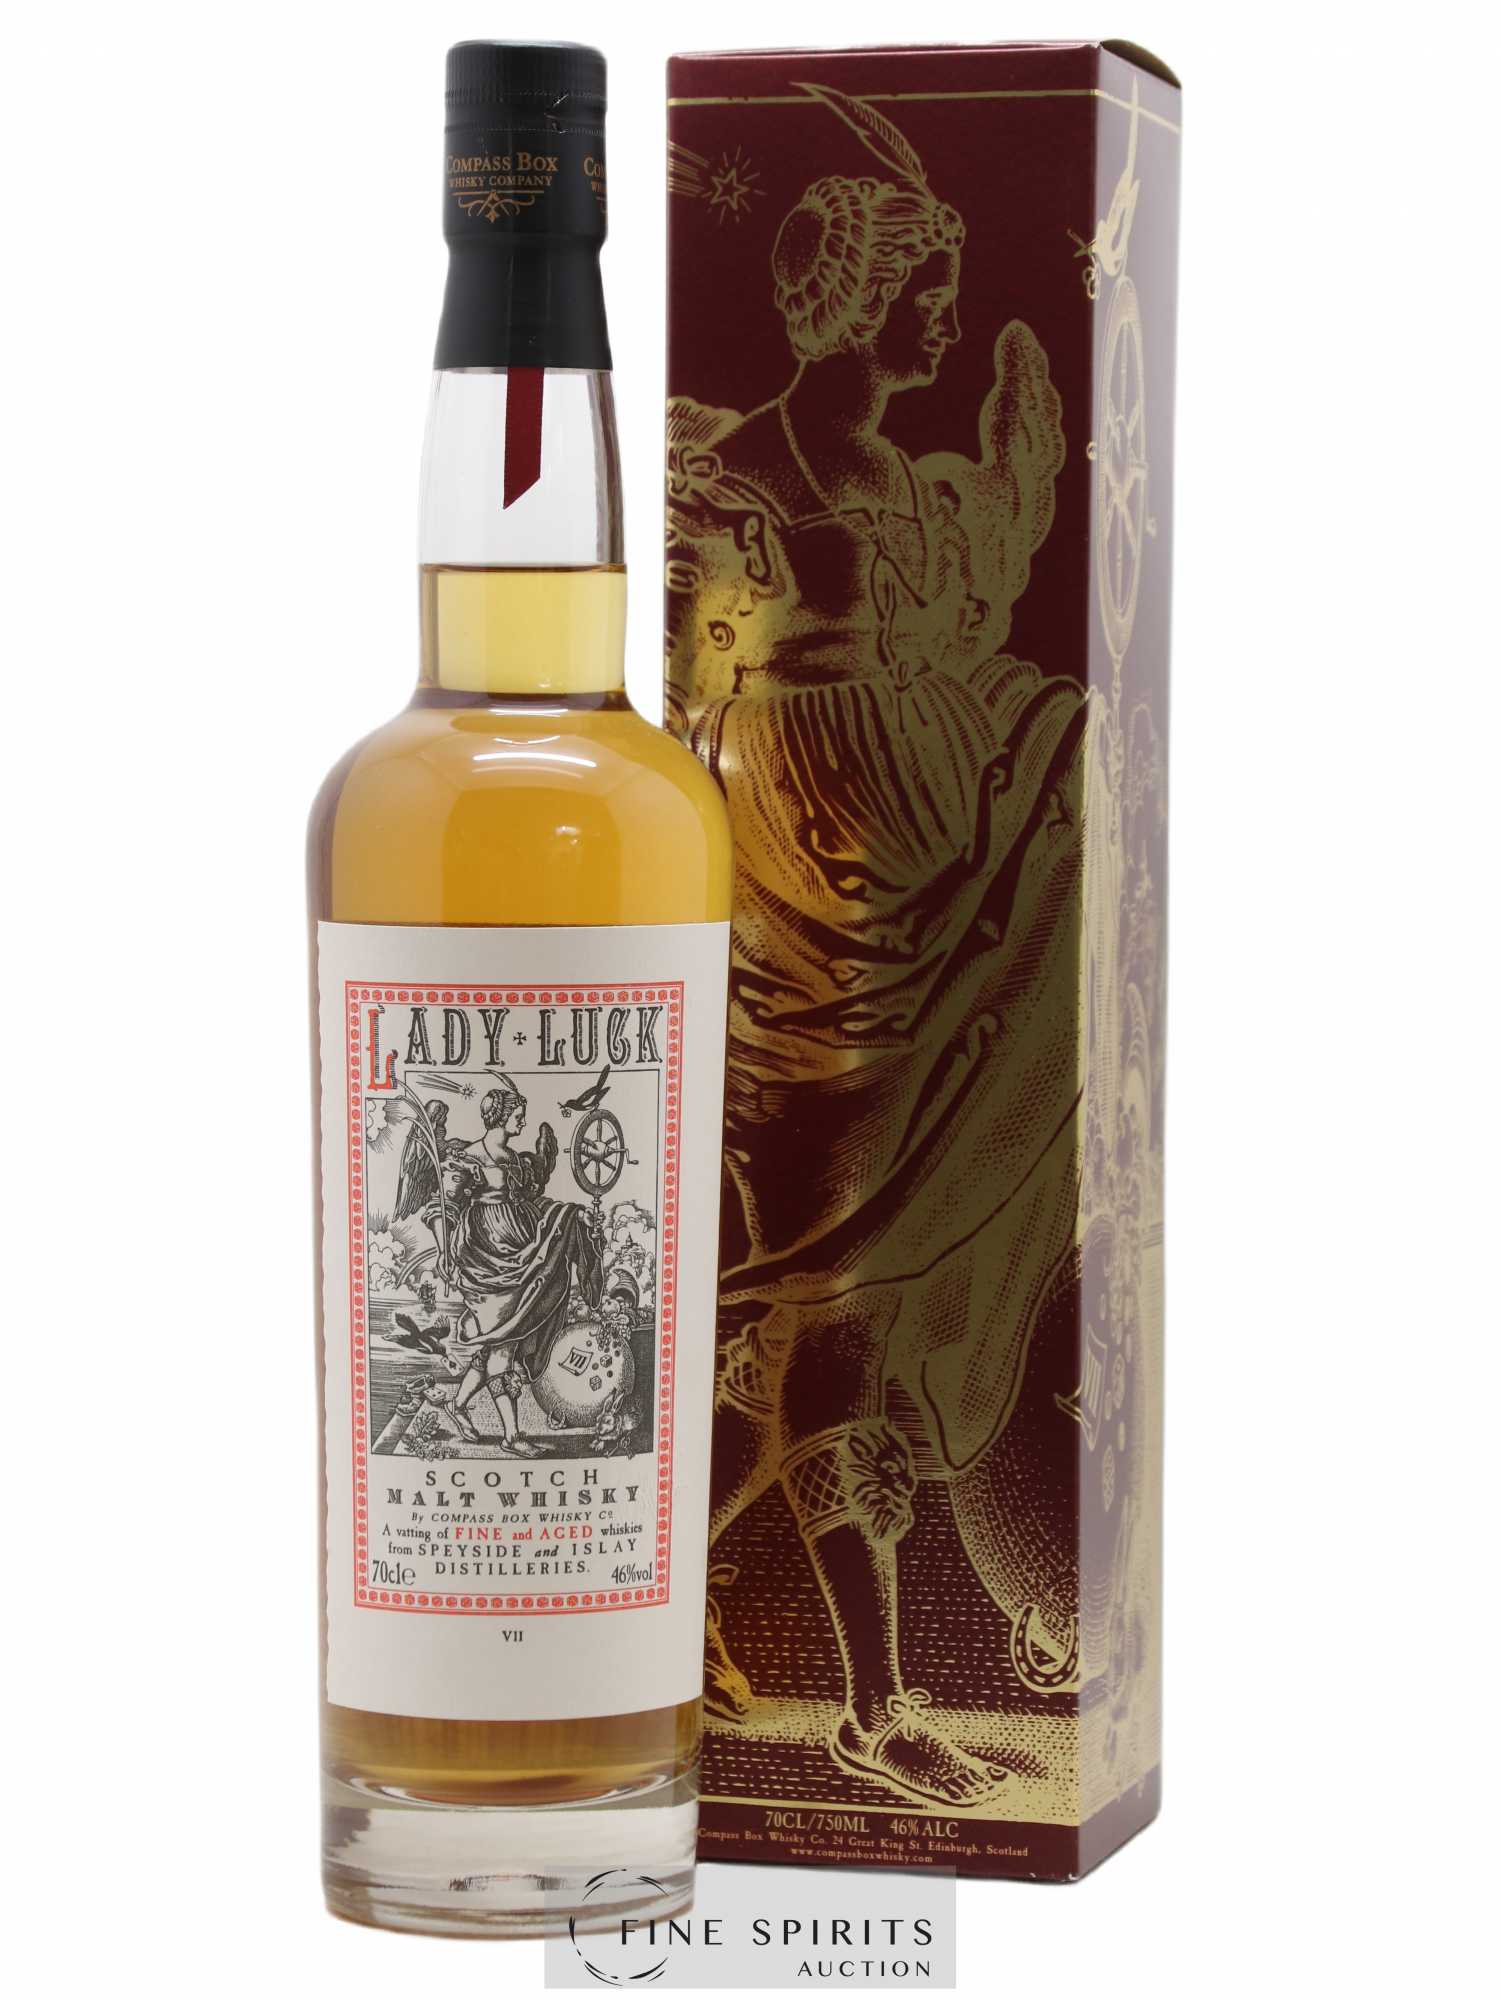 Lady Luck Compass Box VII Limited Release of 754 - bottled 2009 